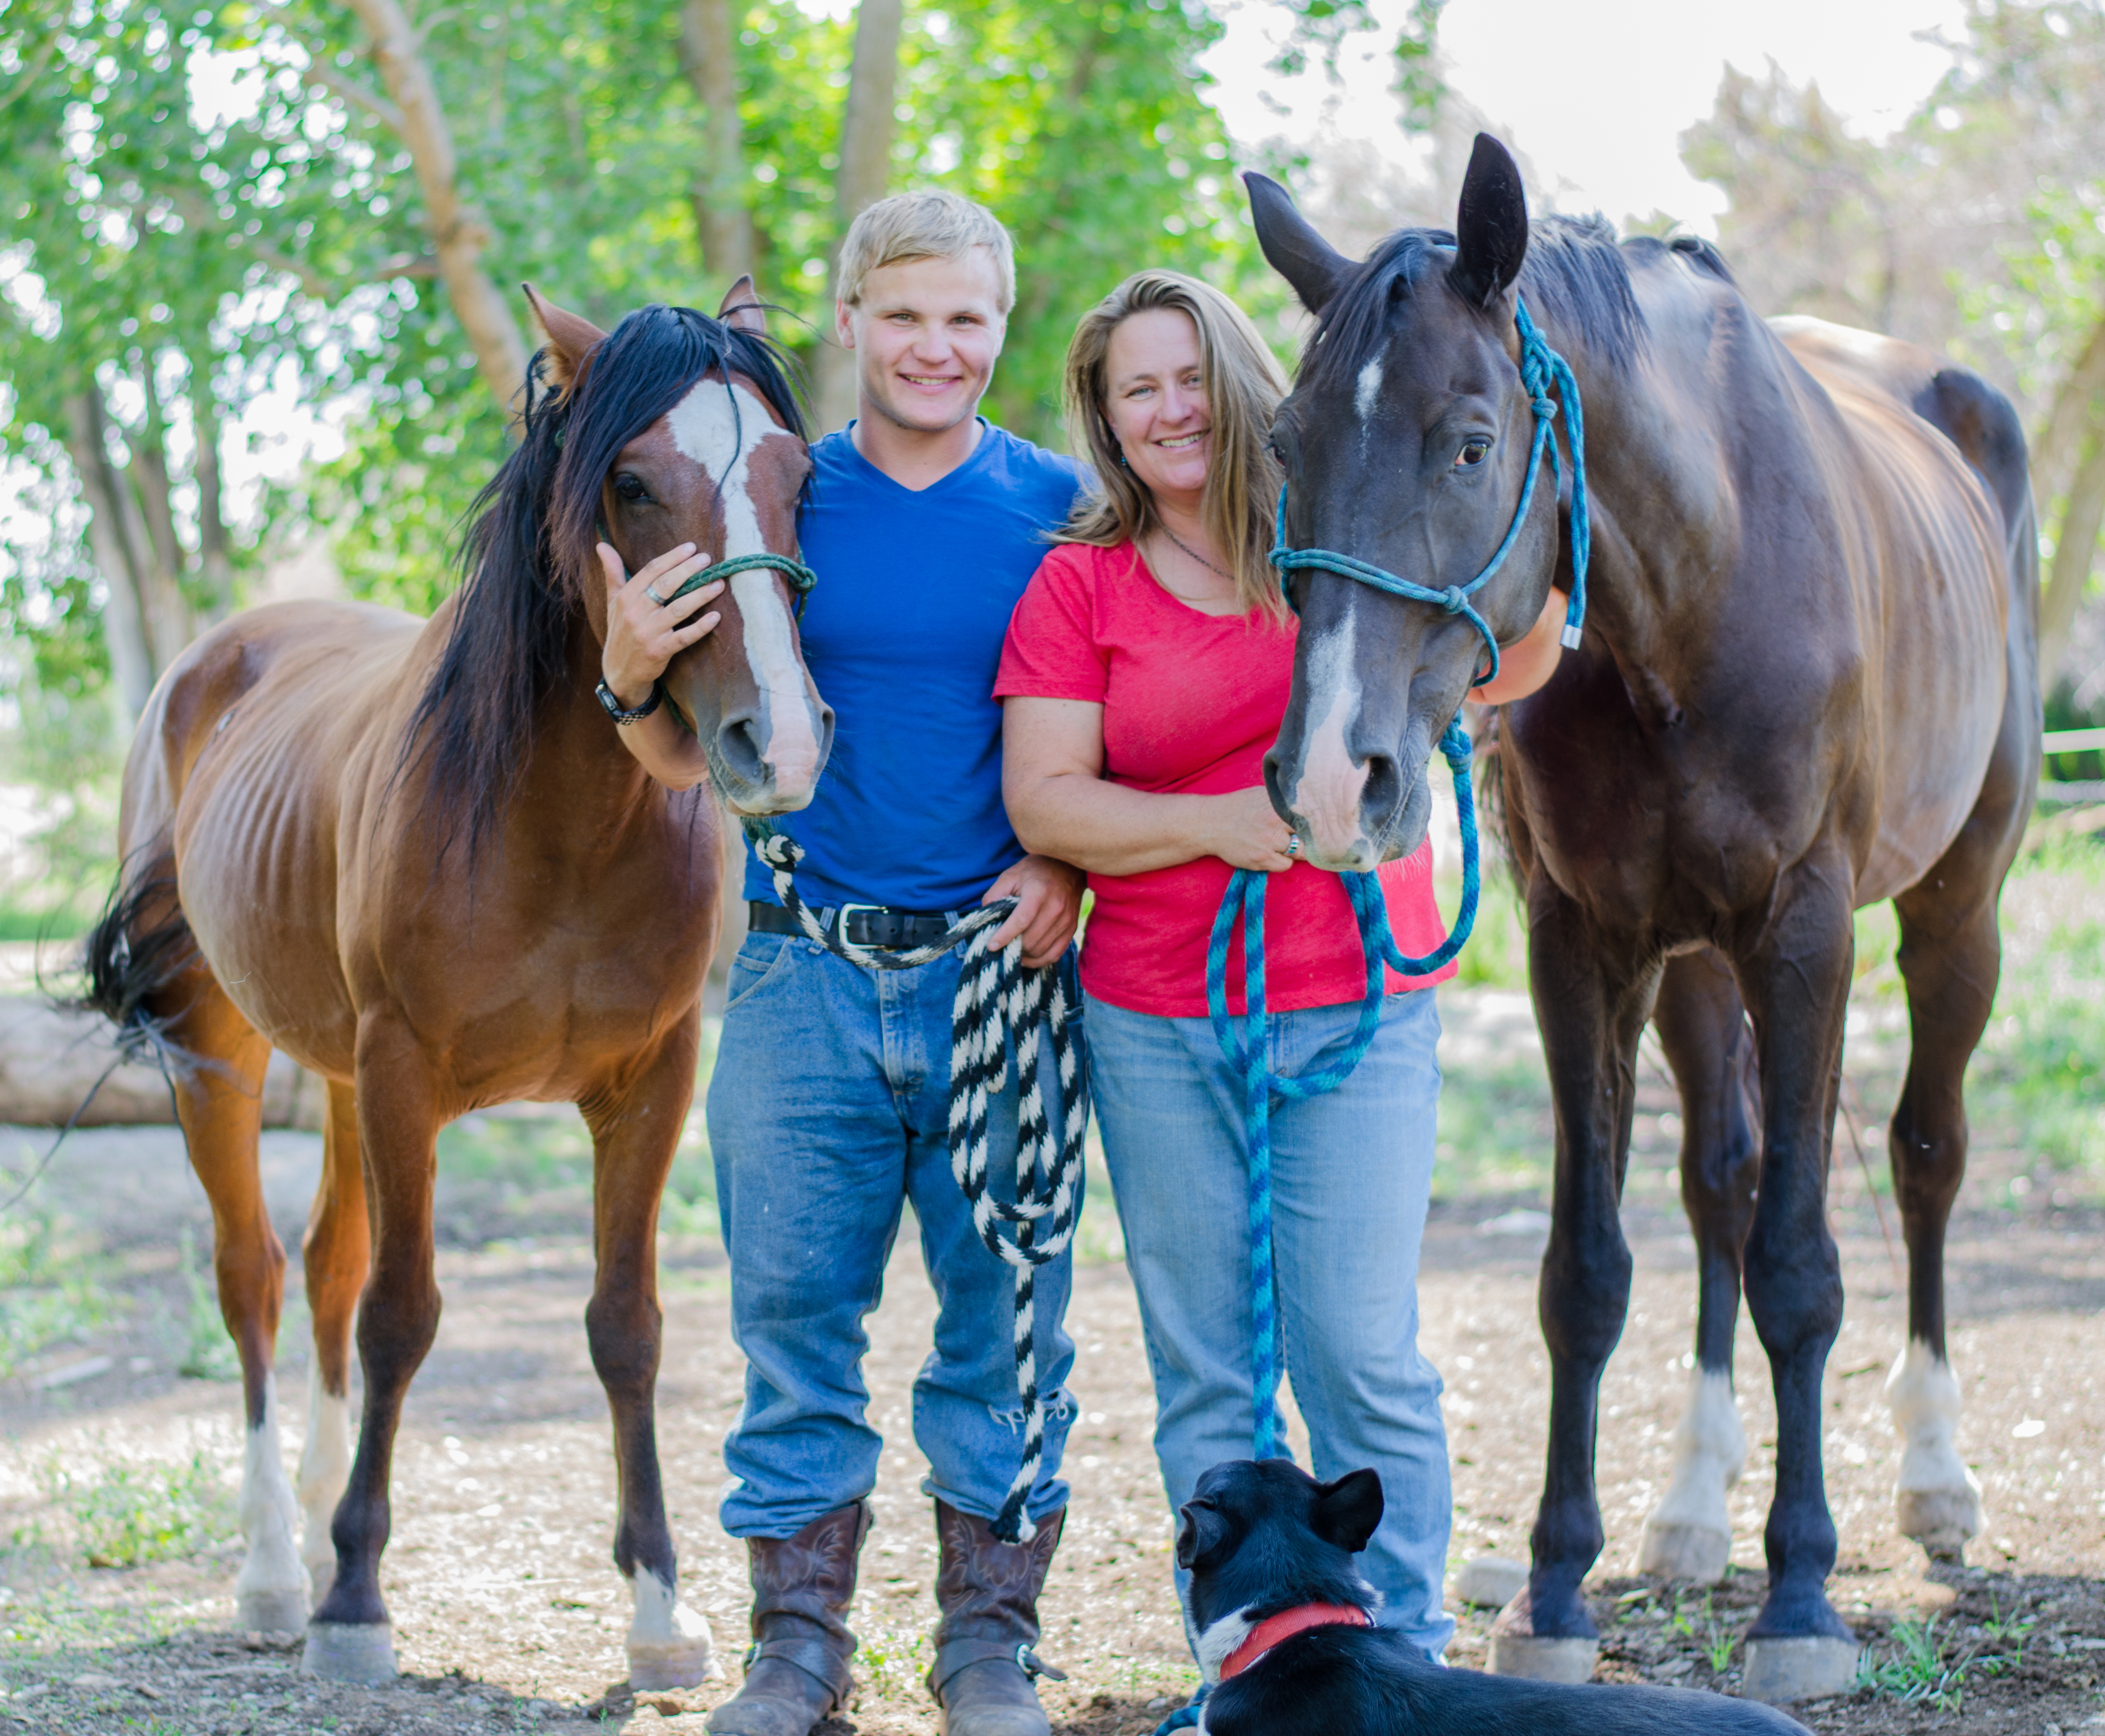 The Stable Place – Healing for Horses and People